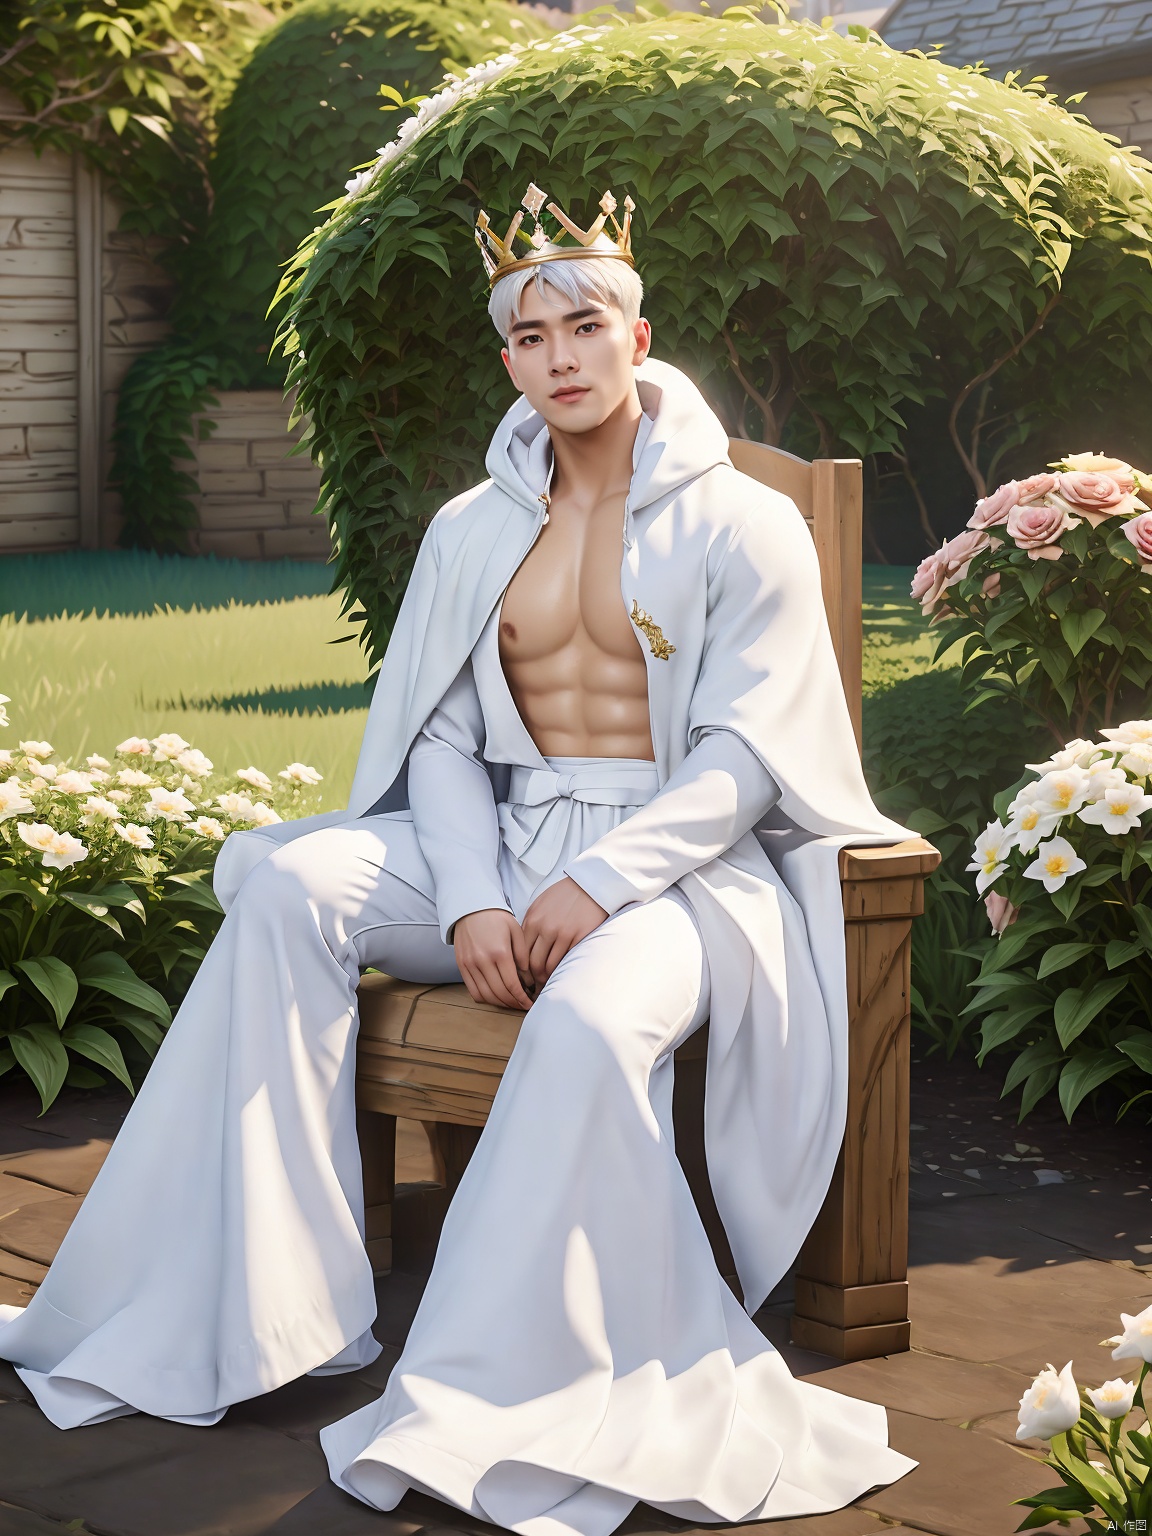  masterpiece,Fortnite,1 boy,Look at me,Handsome,White hair,Muscular development,A gorgeous white cloak,Sitting on the throne,outside,Garden,Flower field,Wear a crown,Natural light,UHD,high details,best quality,